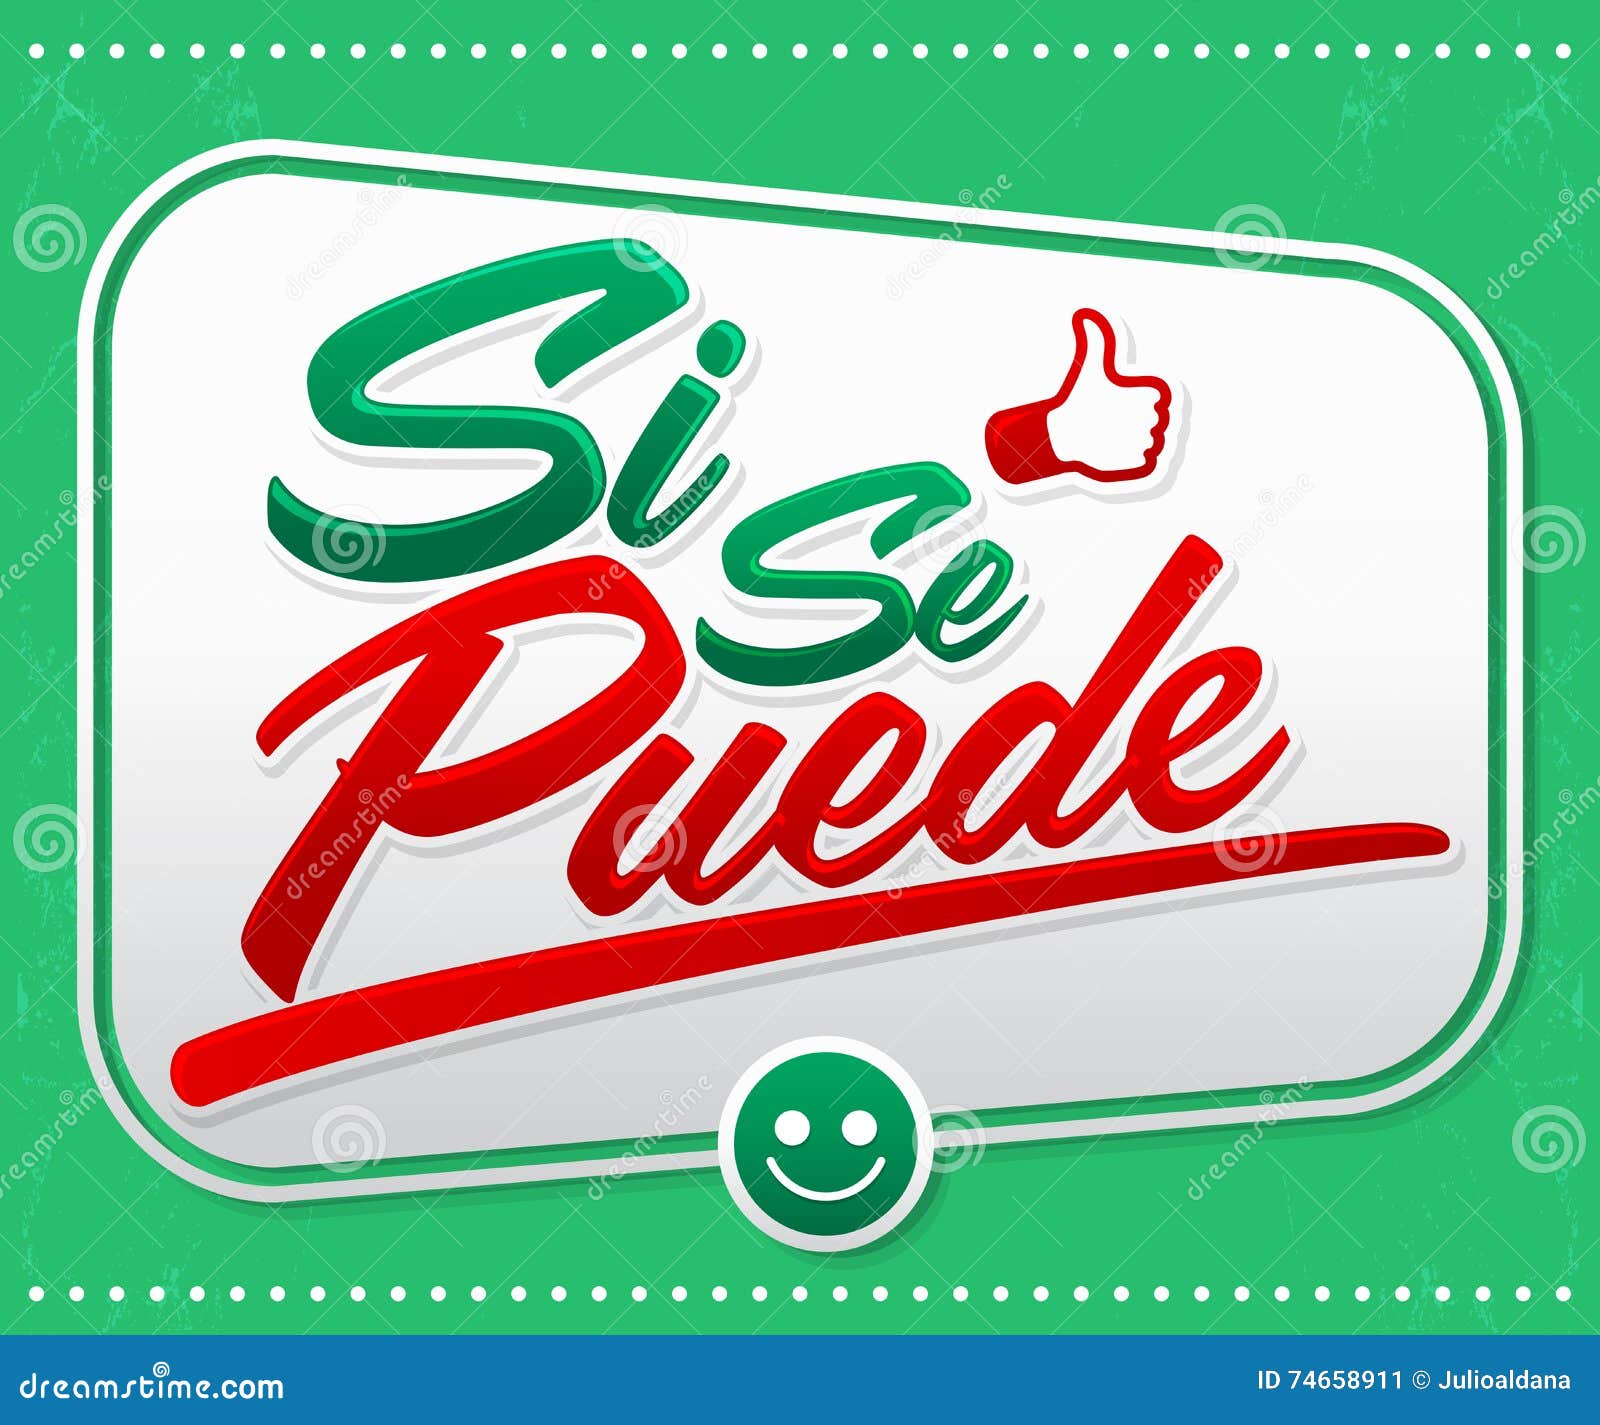 si se puede - yes you can spanish text, common phrase in latin america